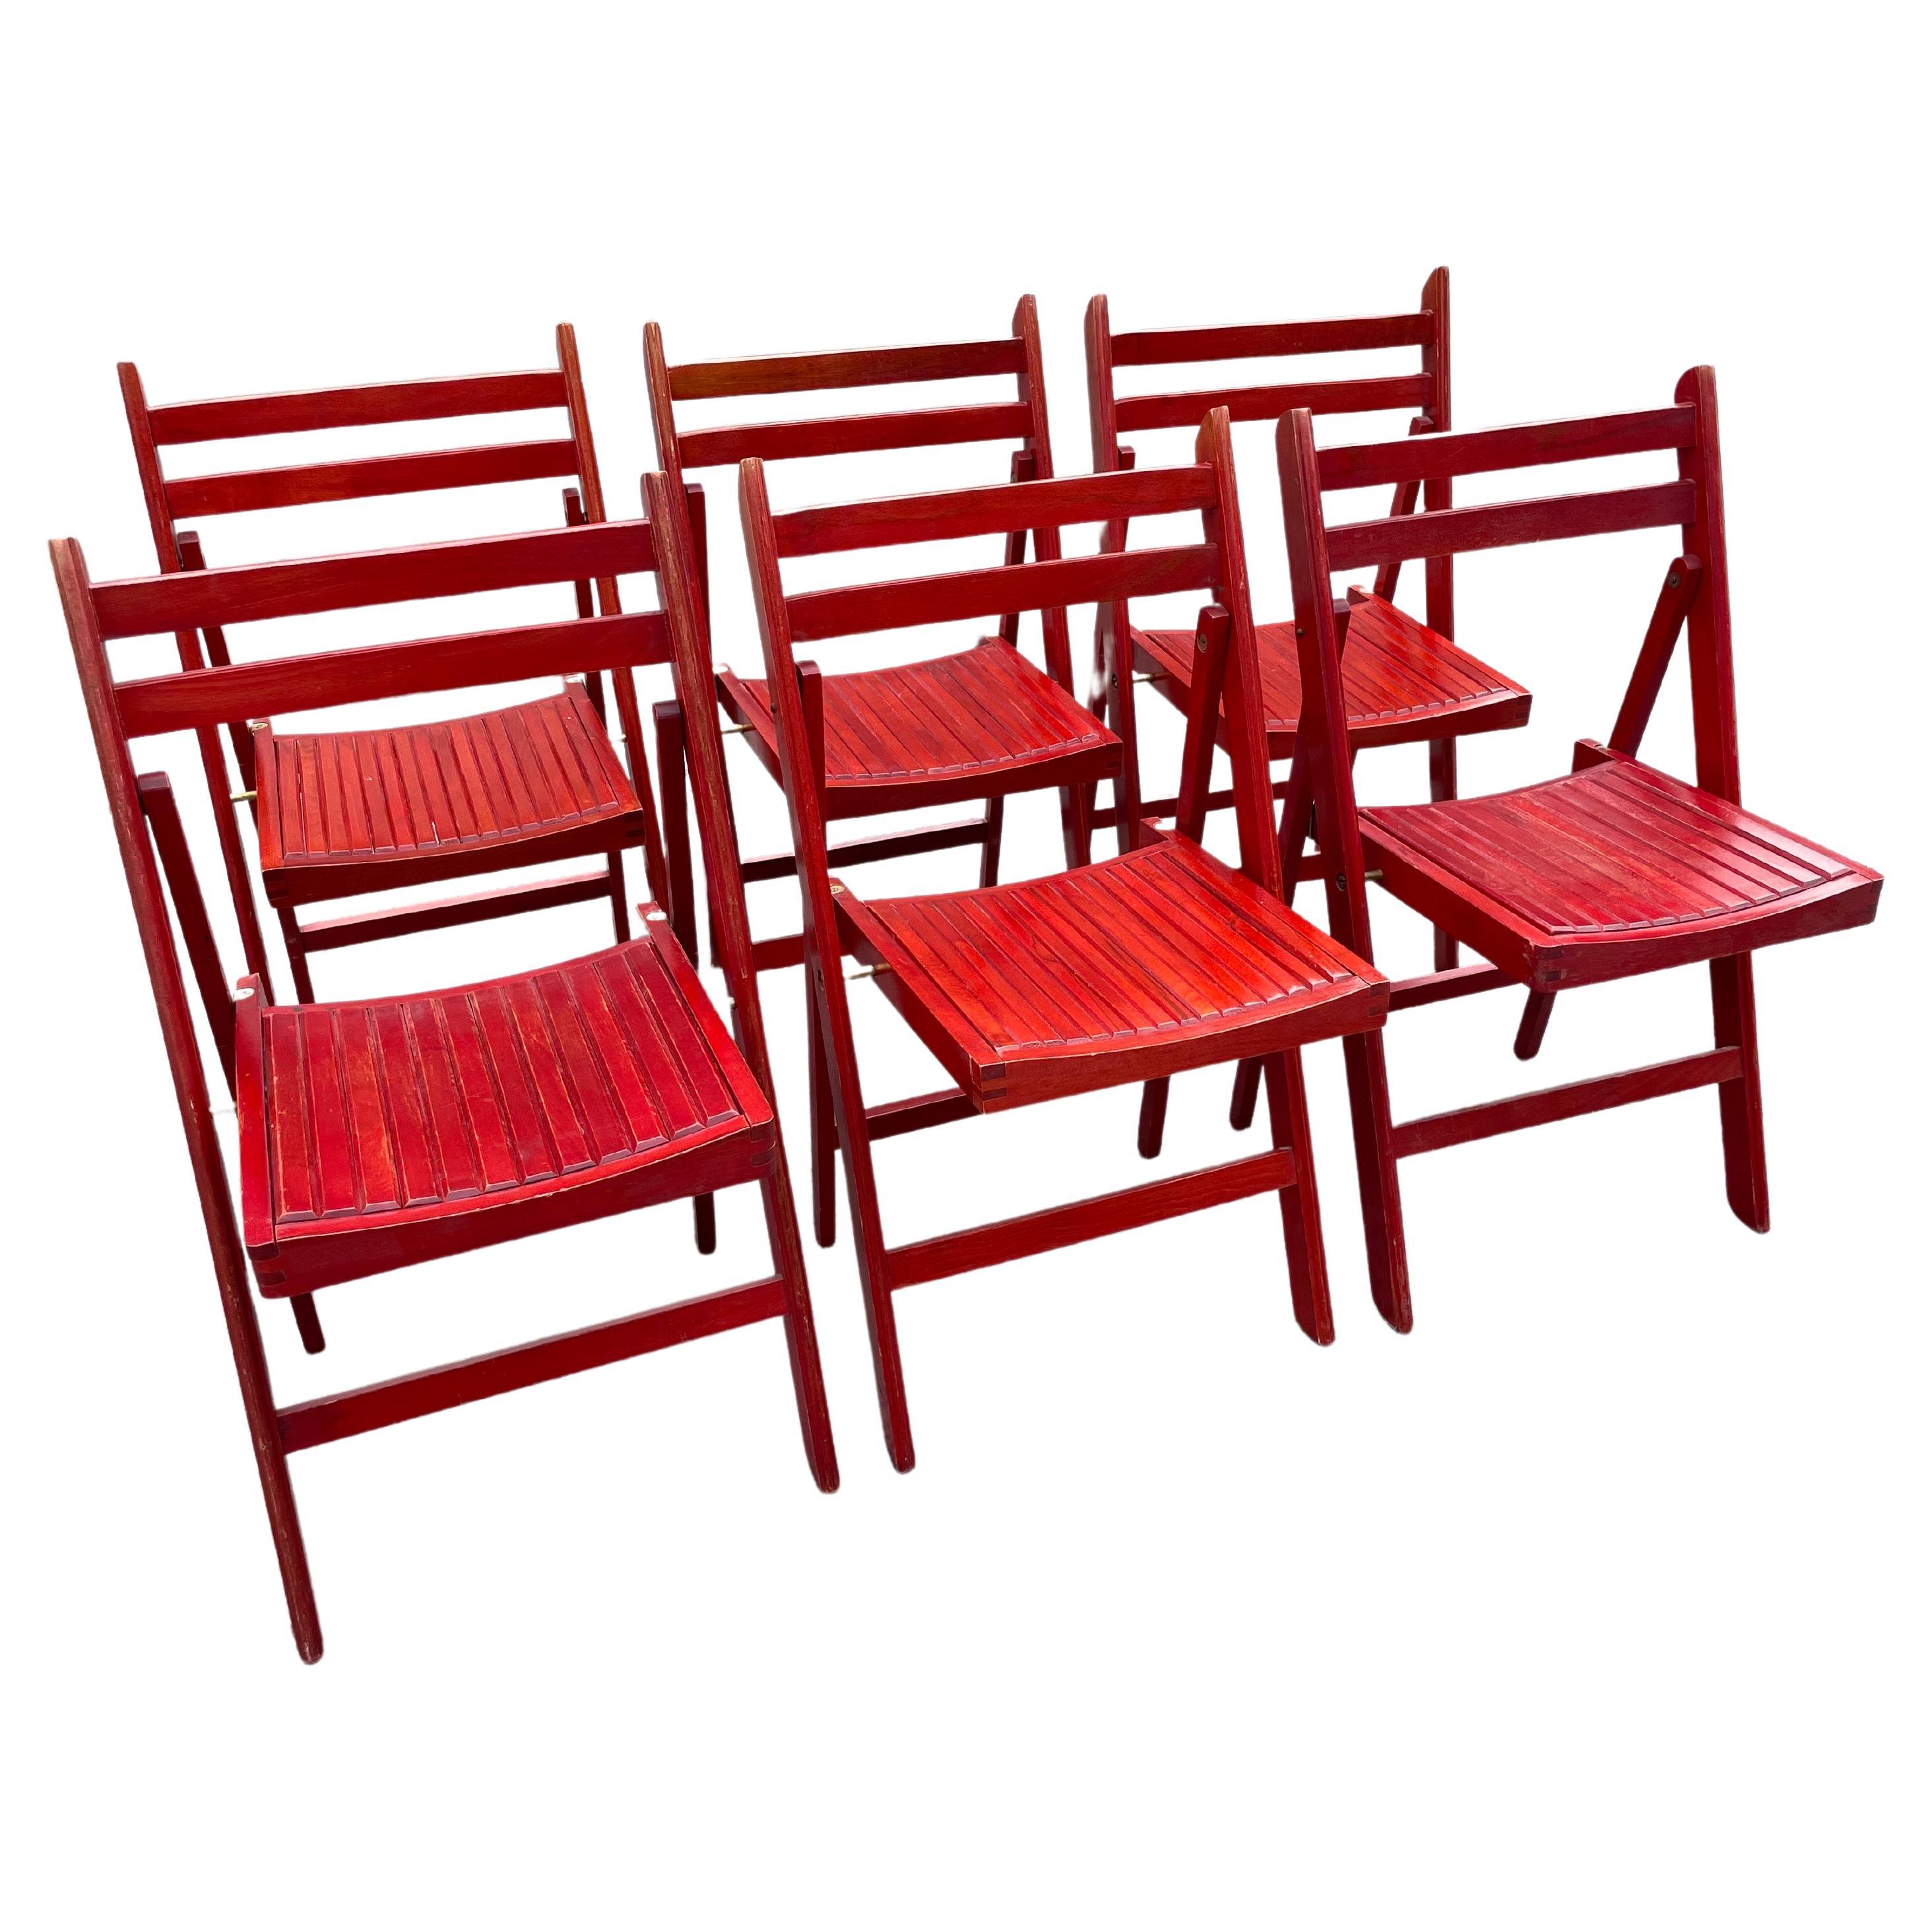 6 Danish Red Foldable Chairs from Late 1970's For Sale